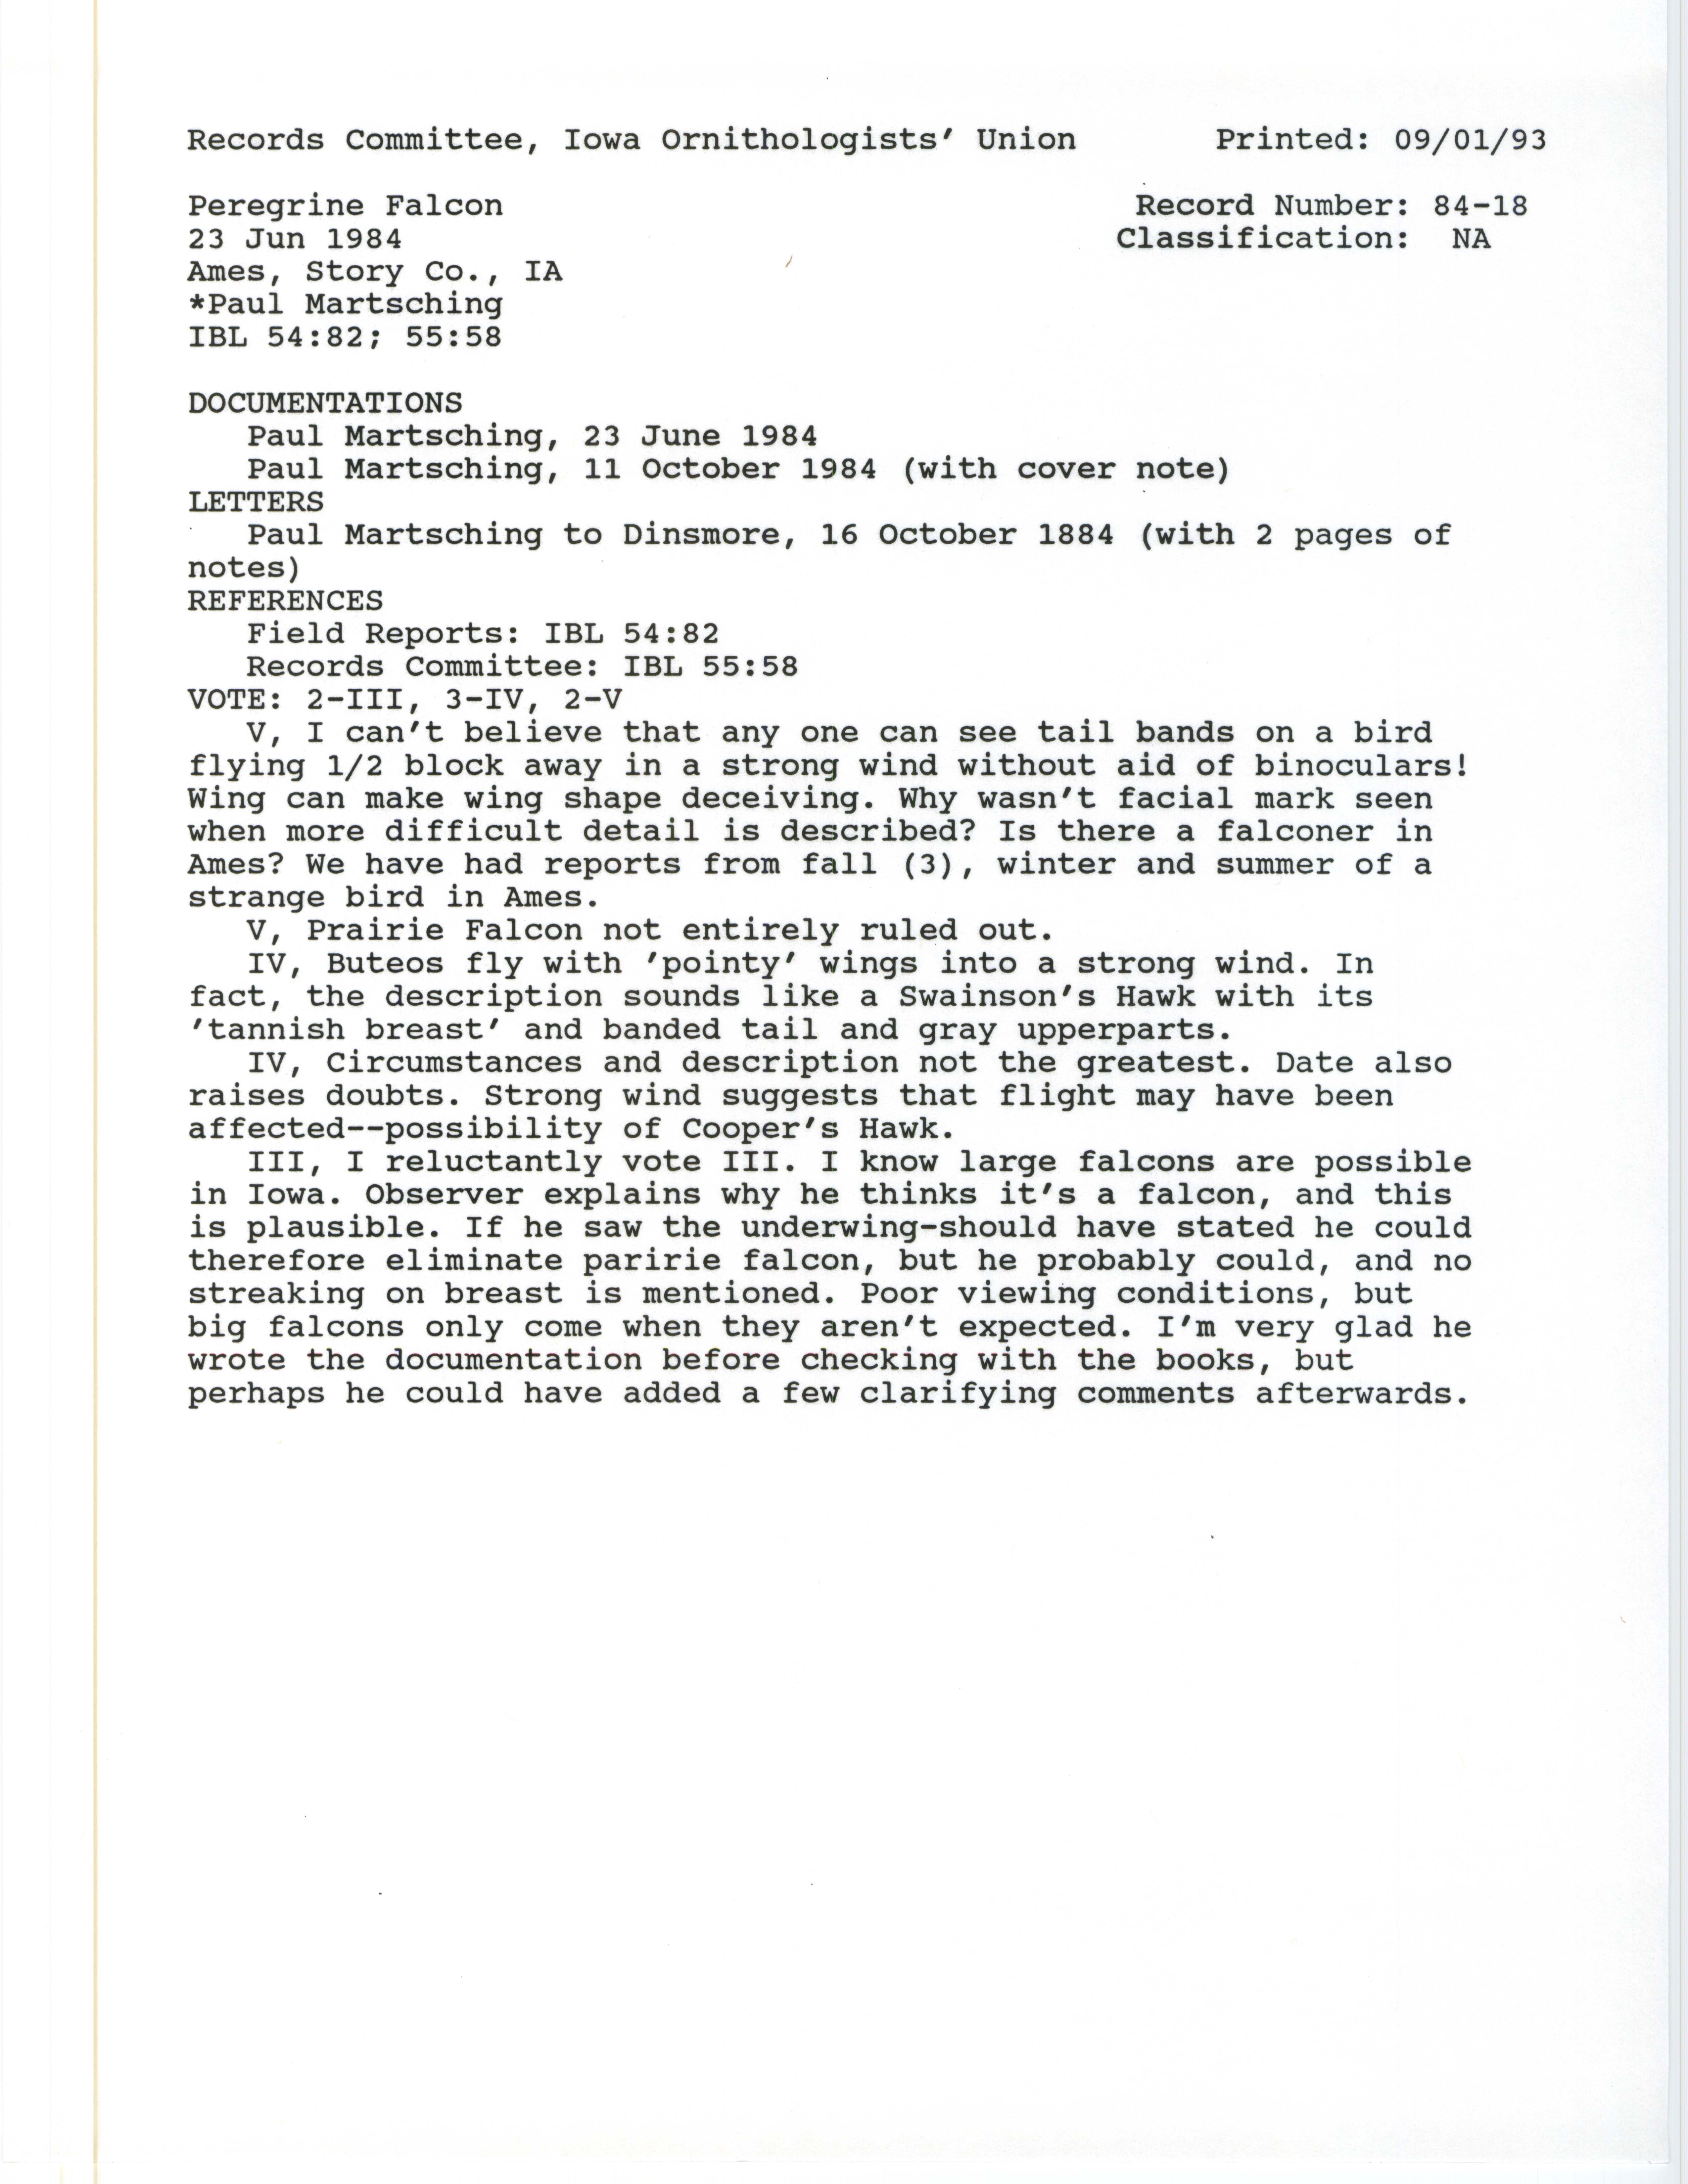 Records Committee review for rare bird sighting of Peregrine Falcon at Ames, 1984